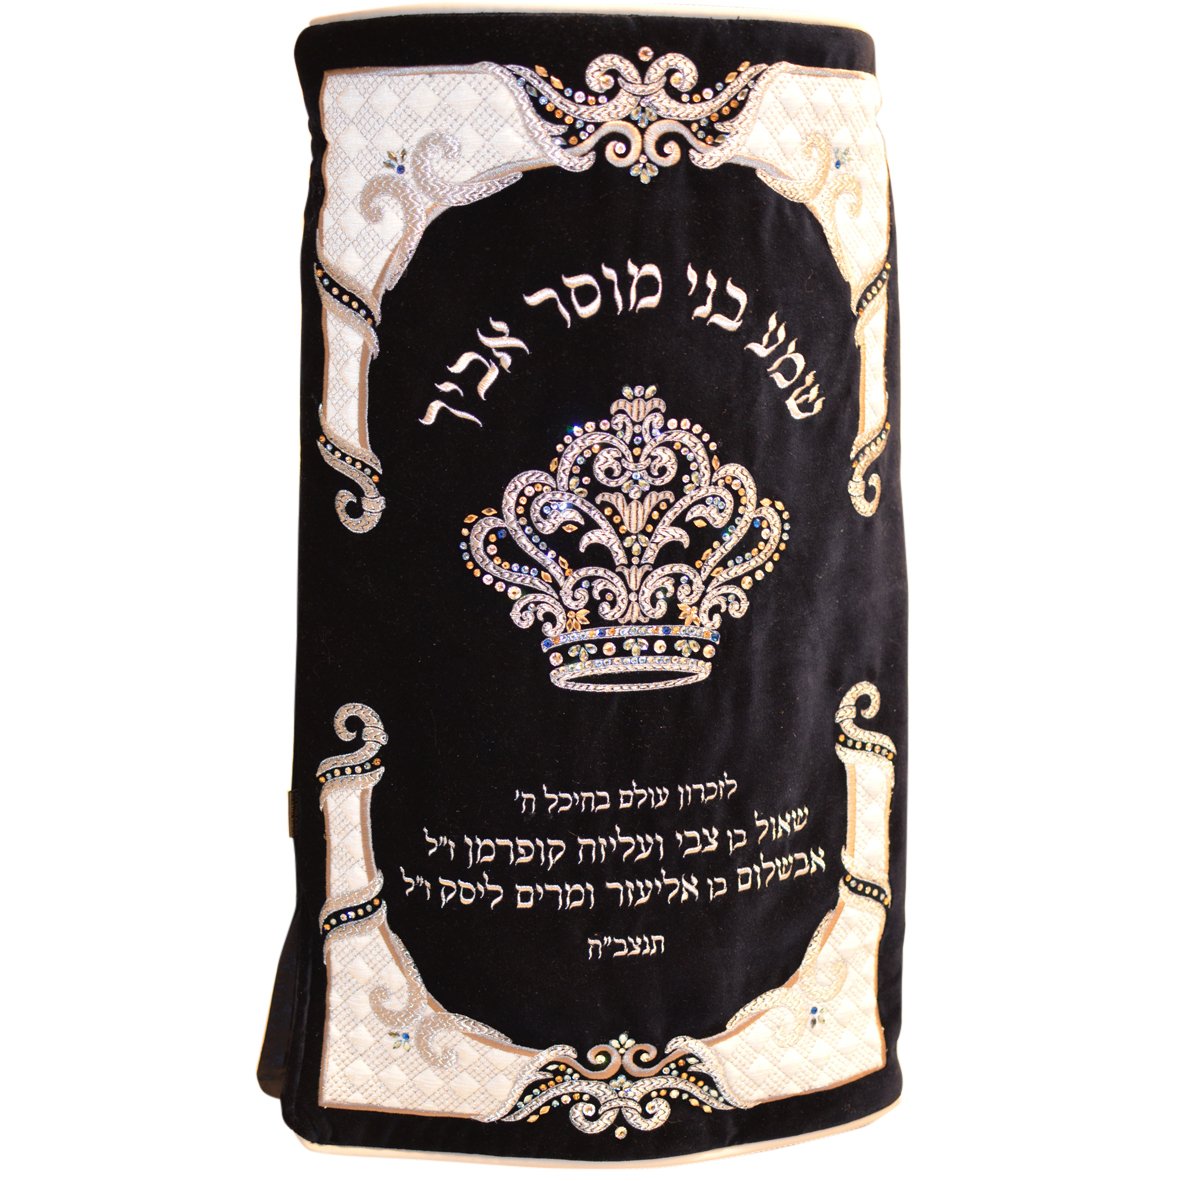   Chana Gamliel's Torah Mantel, adorned with the profound Passuk "Shma beni mussar avicha," epitomizes tradition and devotion. Crafted with meticulous dedication, this Torah Mantel is a masterpiece of elegance and spirituality. The luxurious black ve